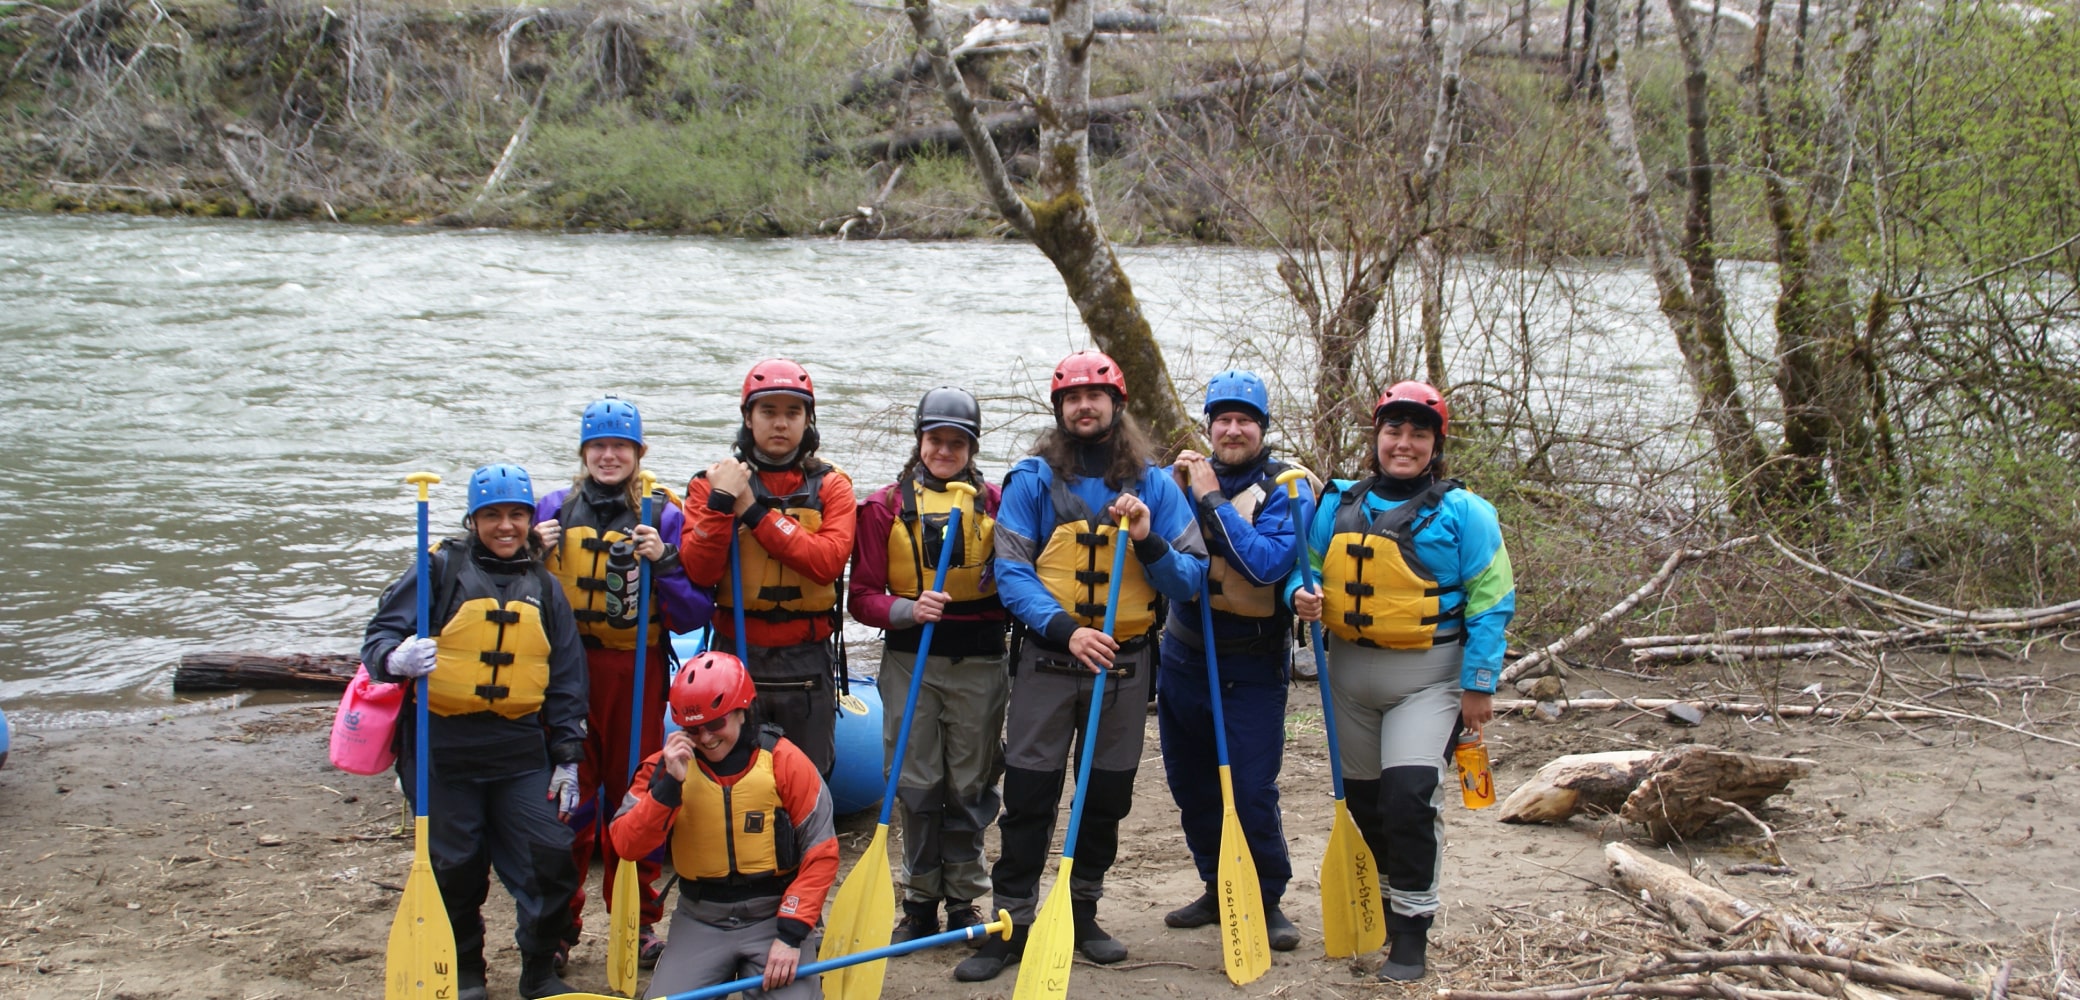 A group of 8 river guide trainees standing with oars, helmets, and life jackets along the river bank.